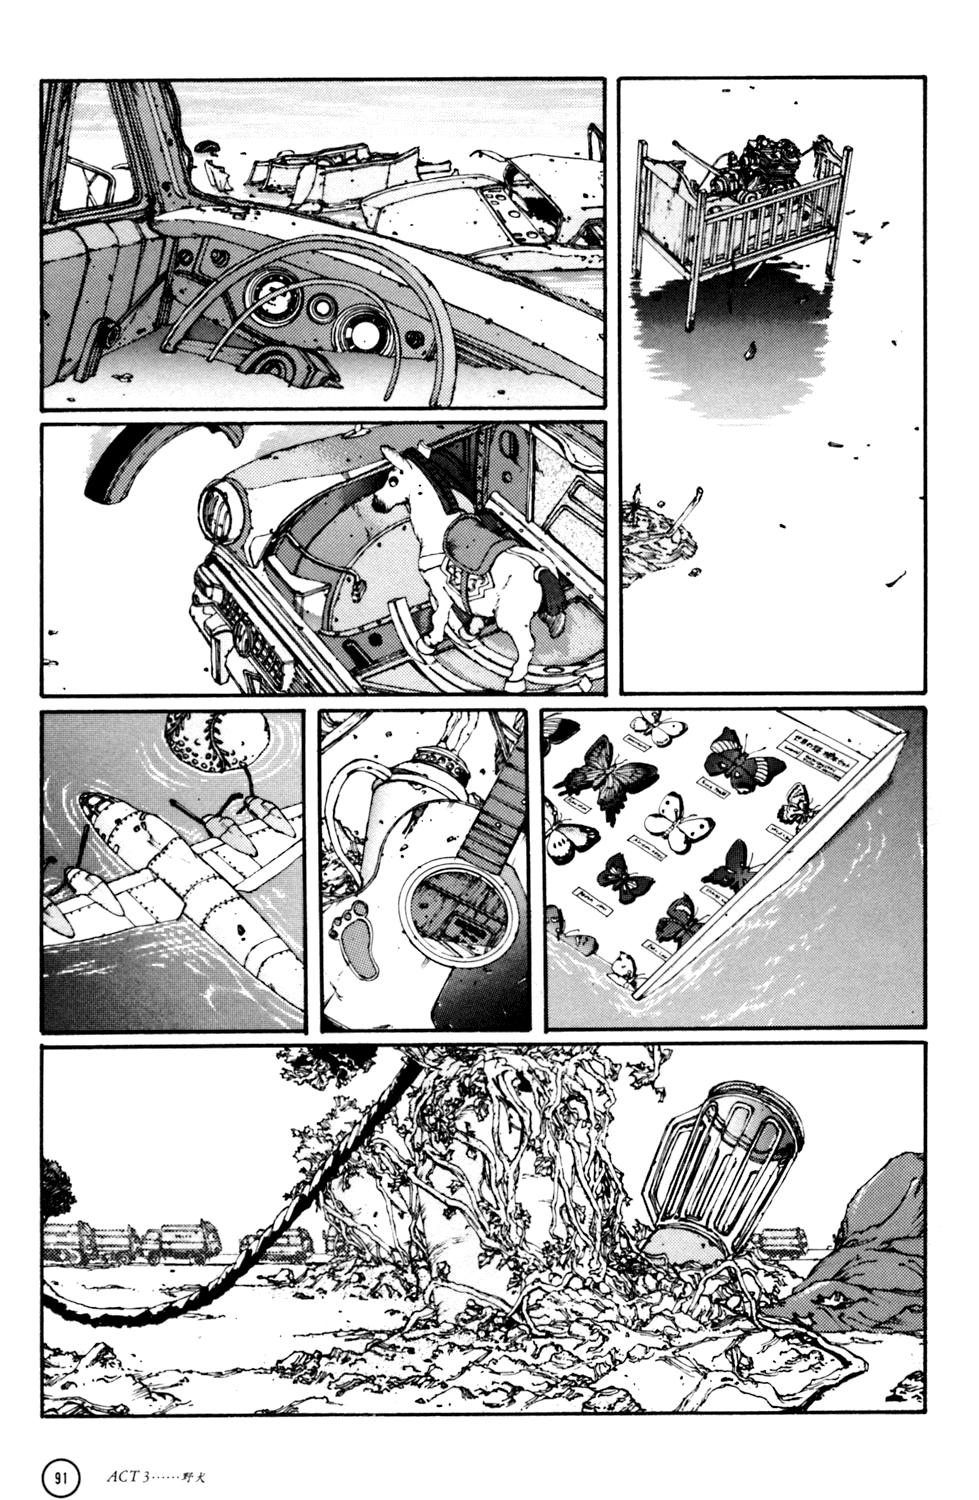 Kerberos Panzer Cop Vol.1 Chapter 3: Act 3 - Stray Dog - Picture 3